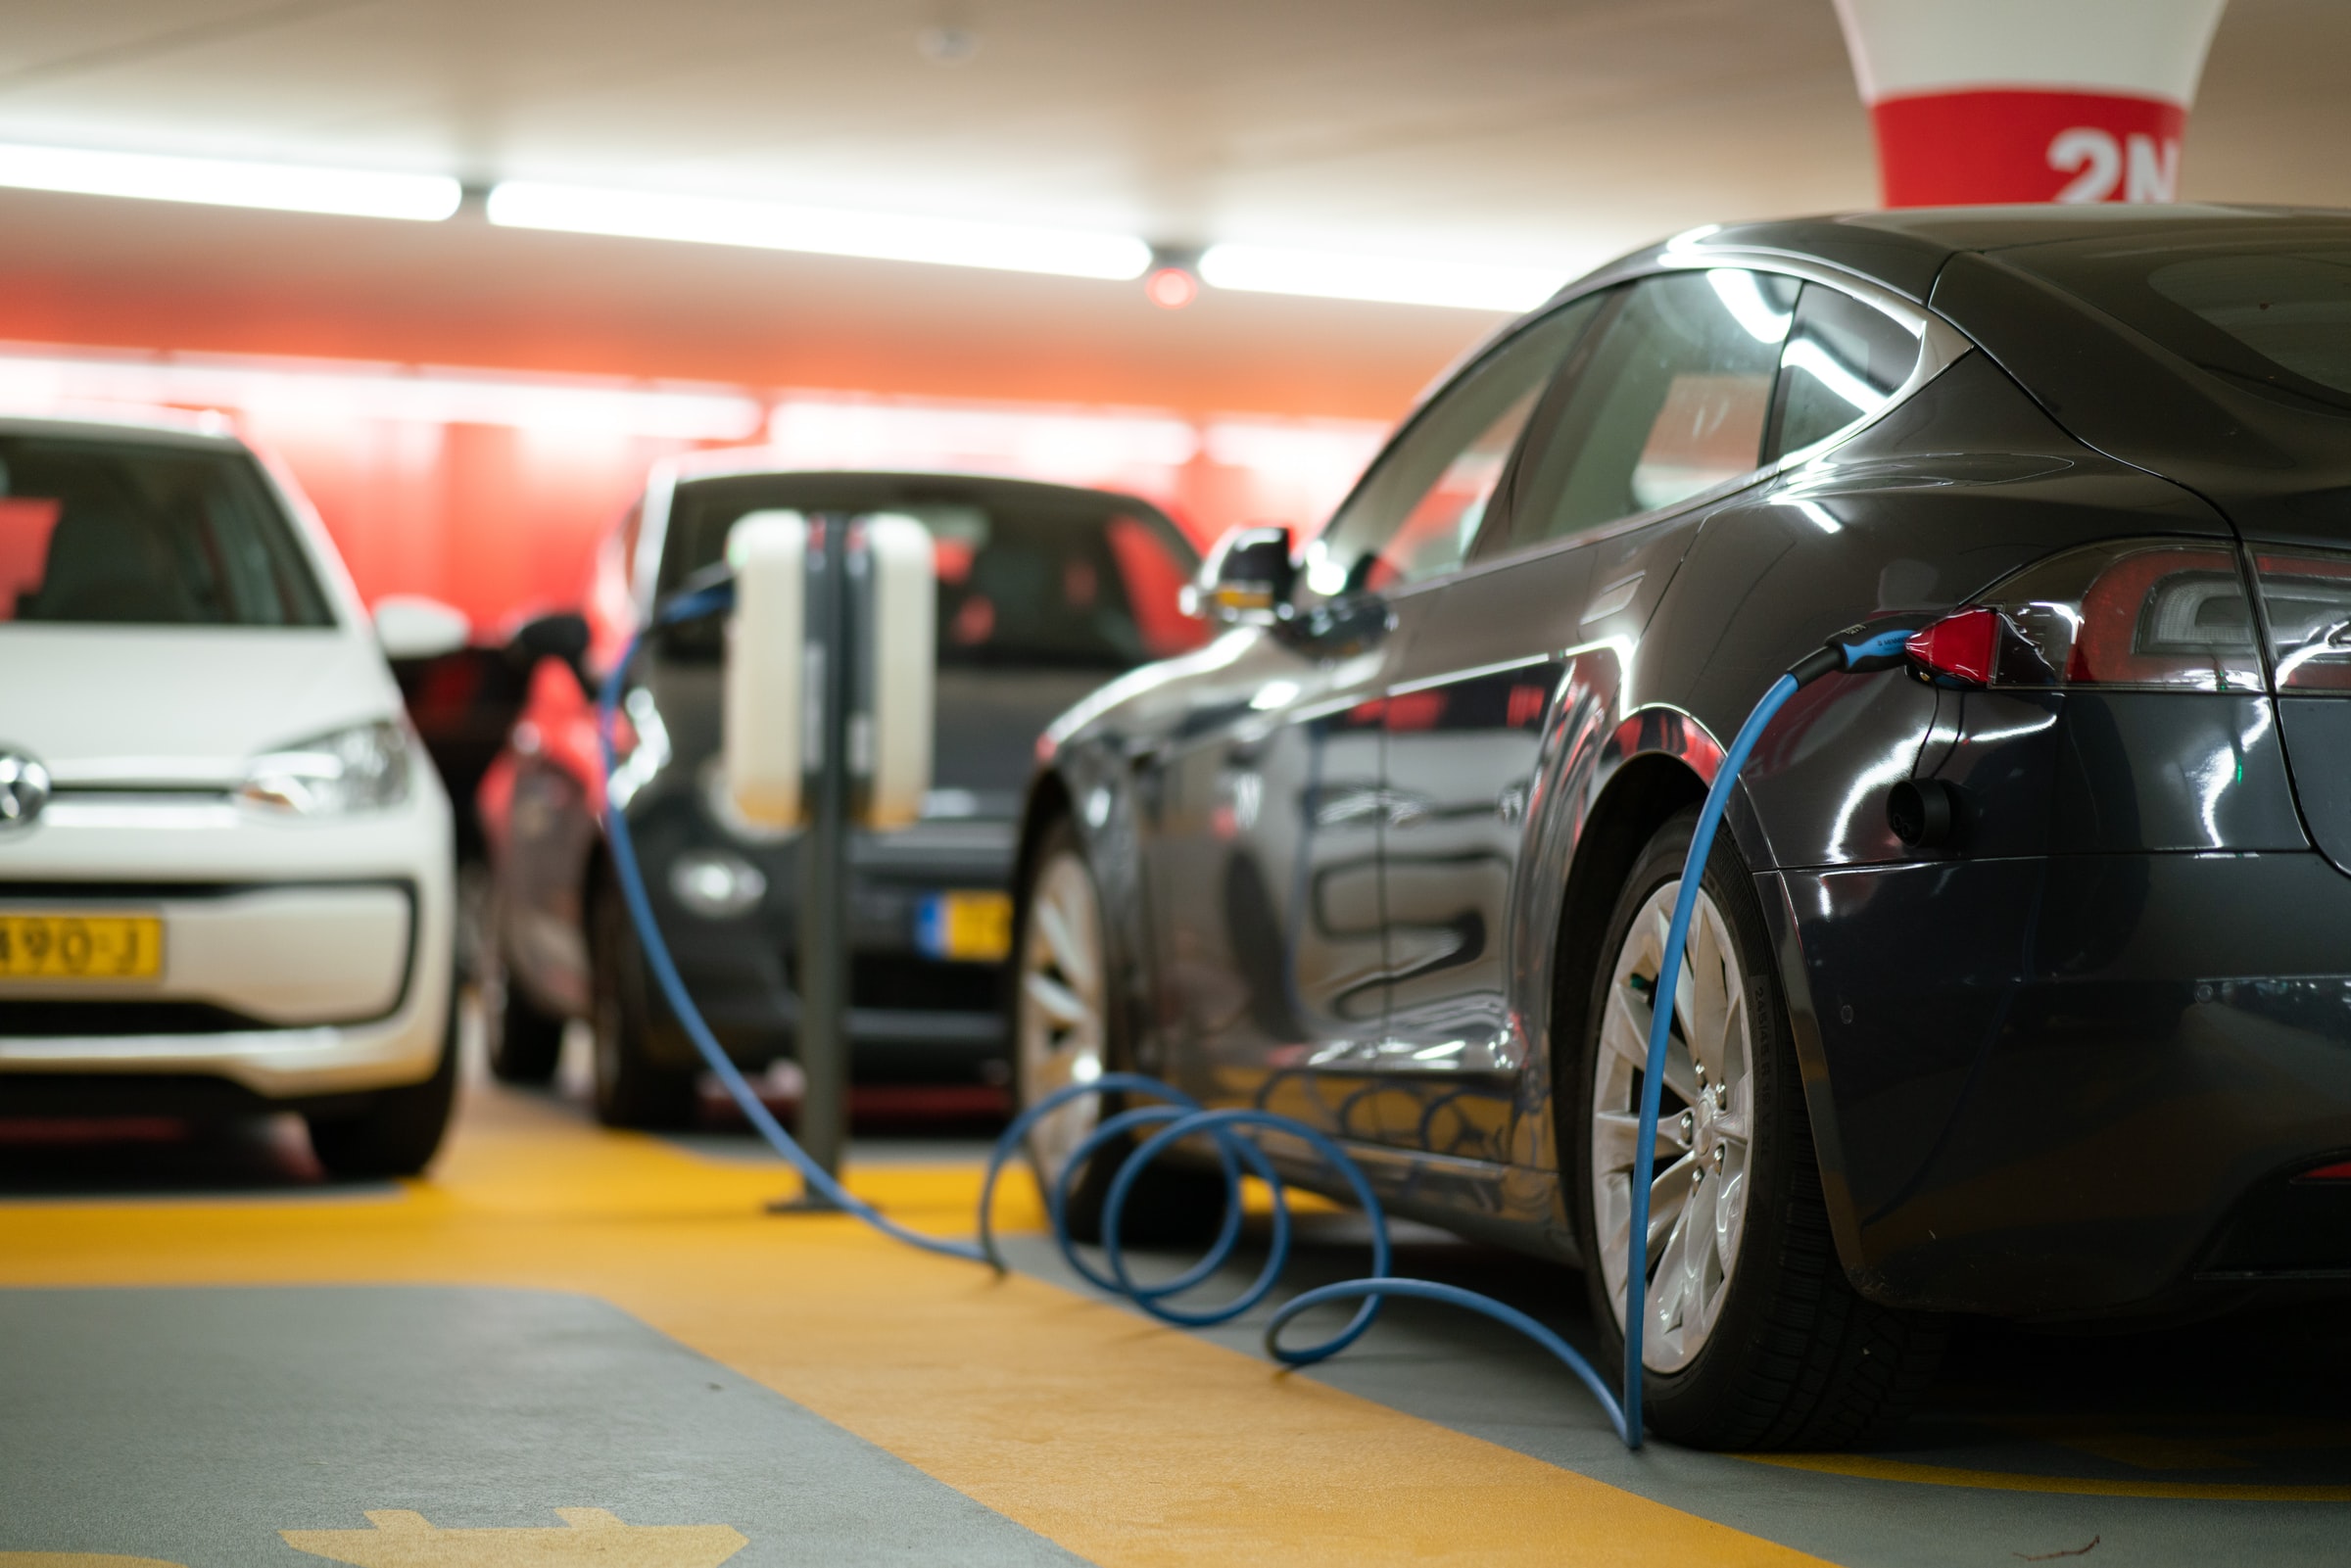 Long-Term Parking for Electric Vehicles: Tips to Keep Your EV Safe & Charged During Your Trip